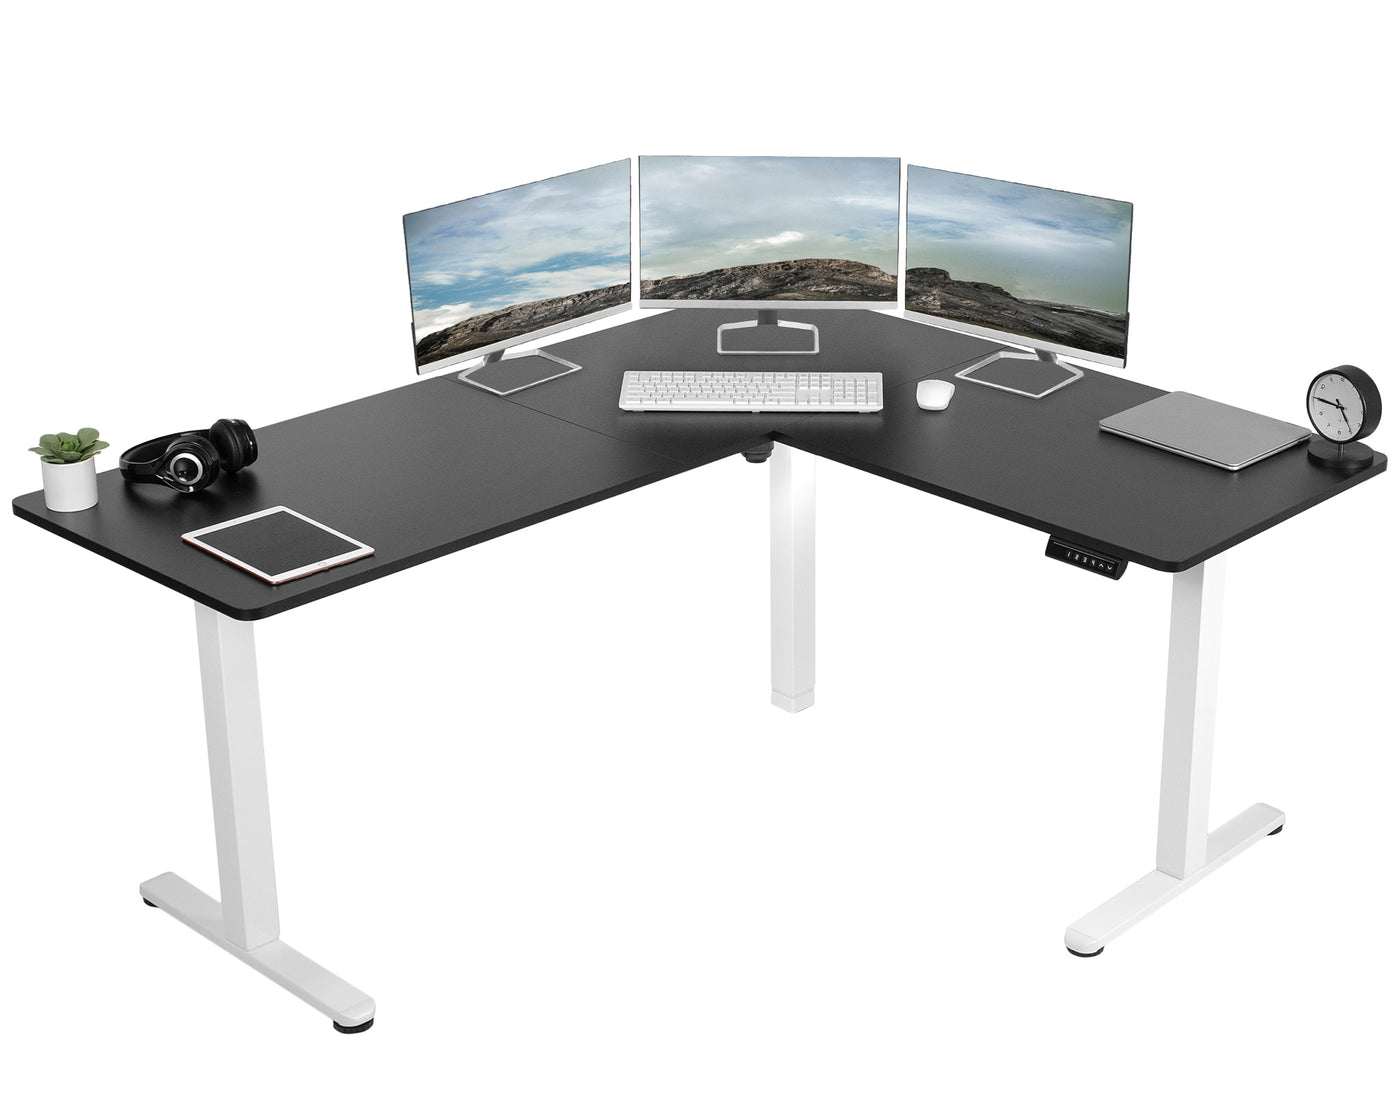 Heavy-duty electric height adjustable corner desk workstation for active sit or stand efficient workspace.